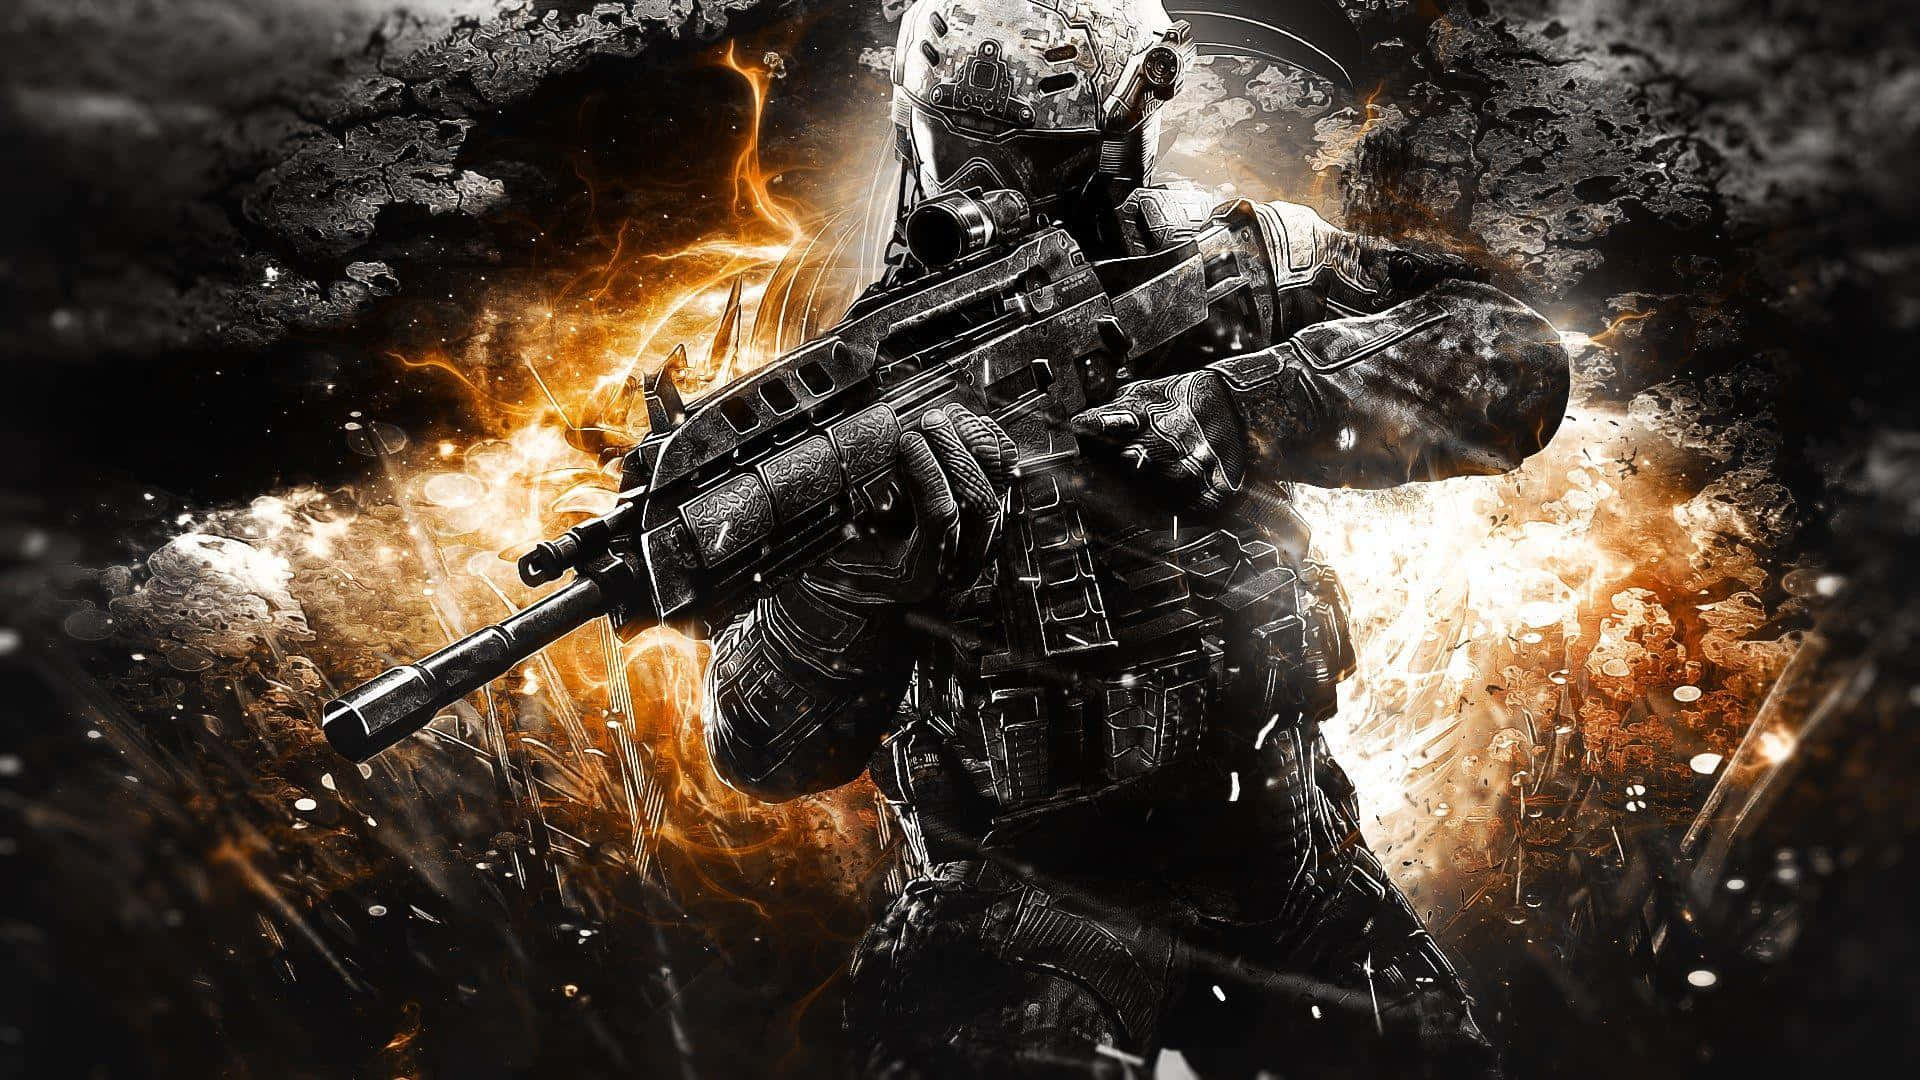 Lock and load with Call of Duty 2020 Wallpaper